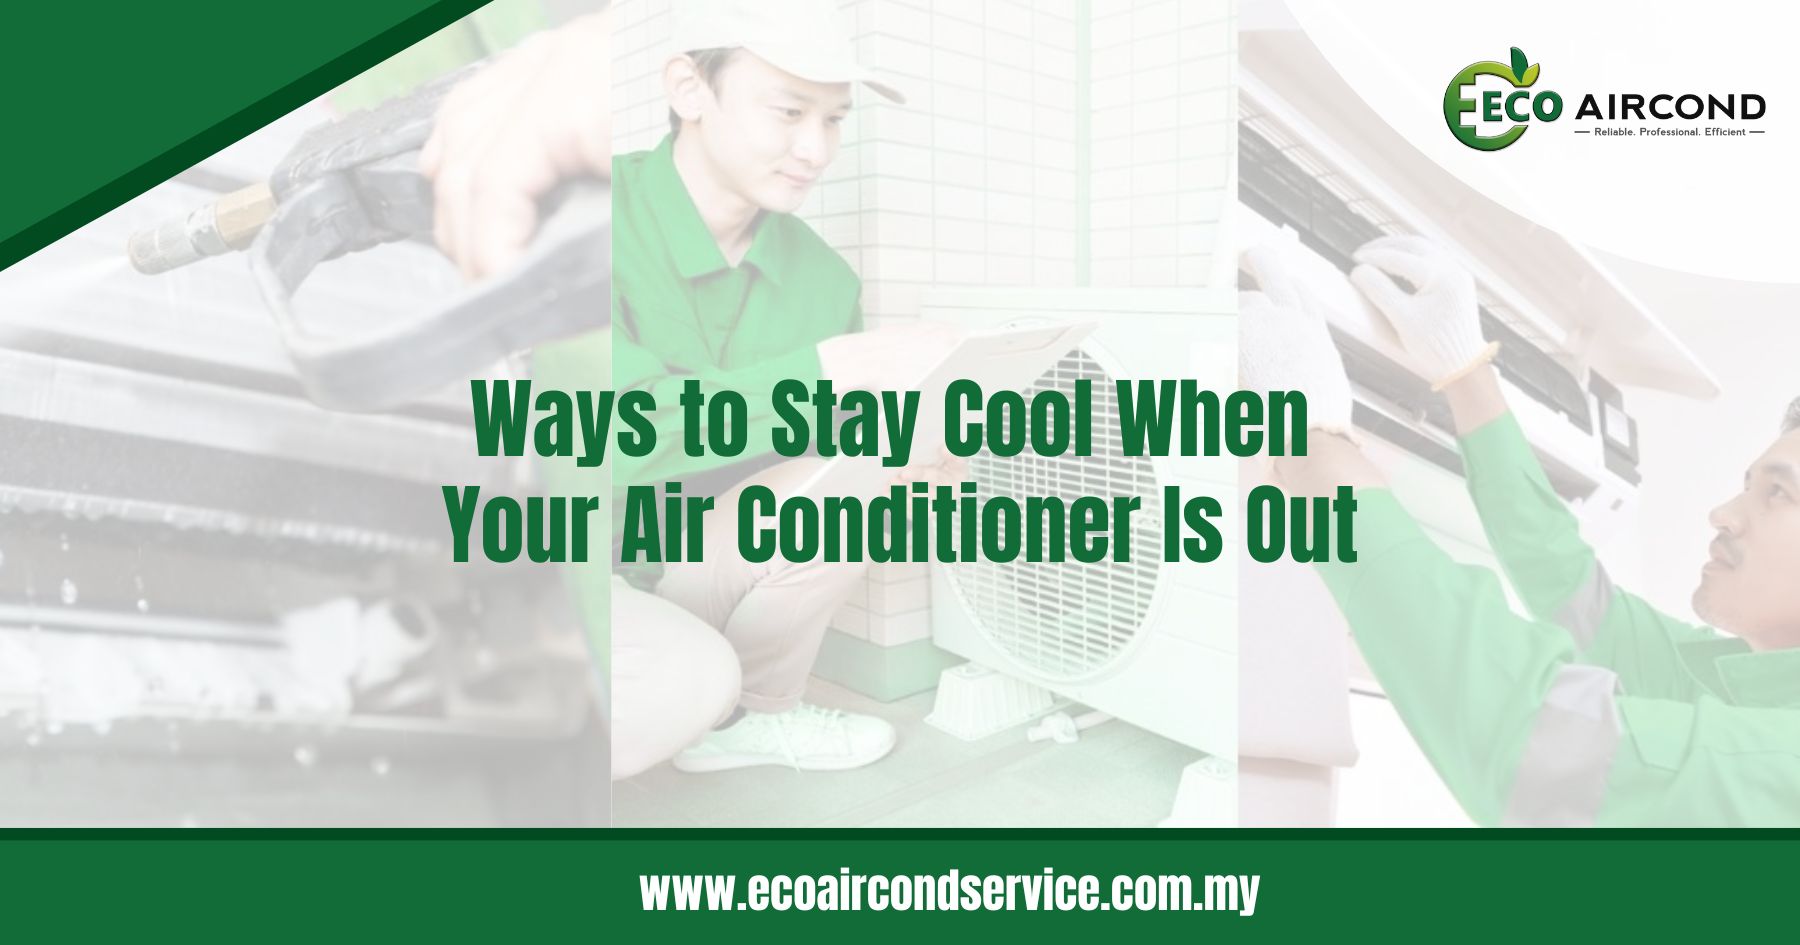 Ways to Stay Cool When Your Air Conditioner Is Out